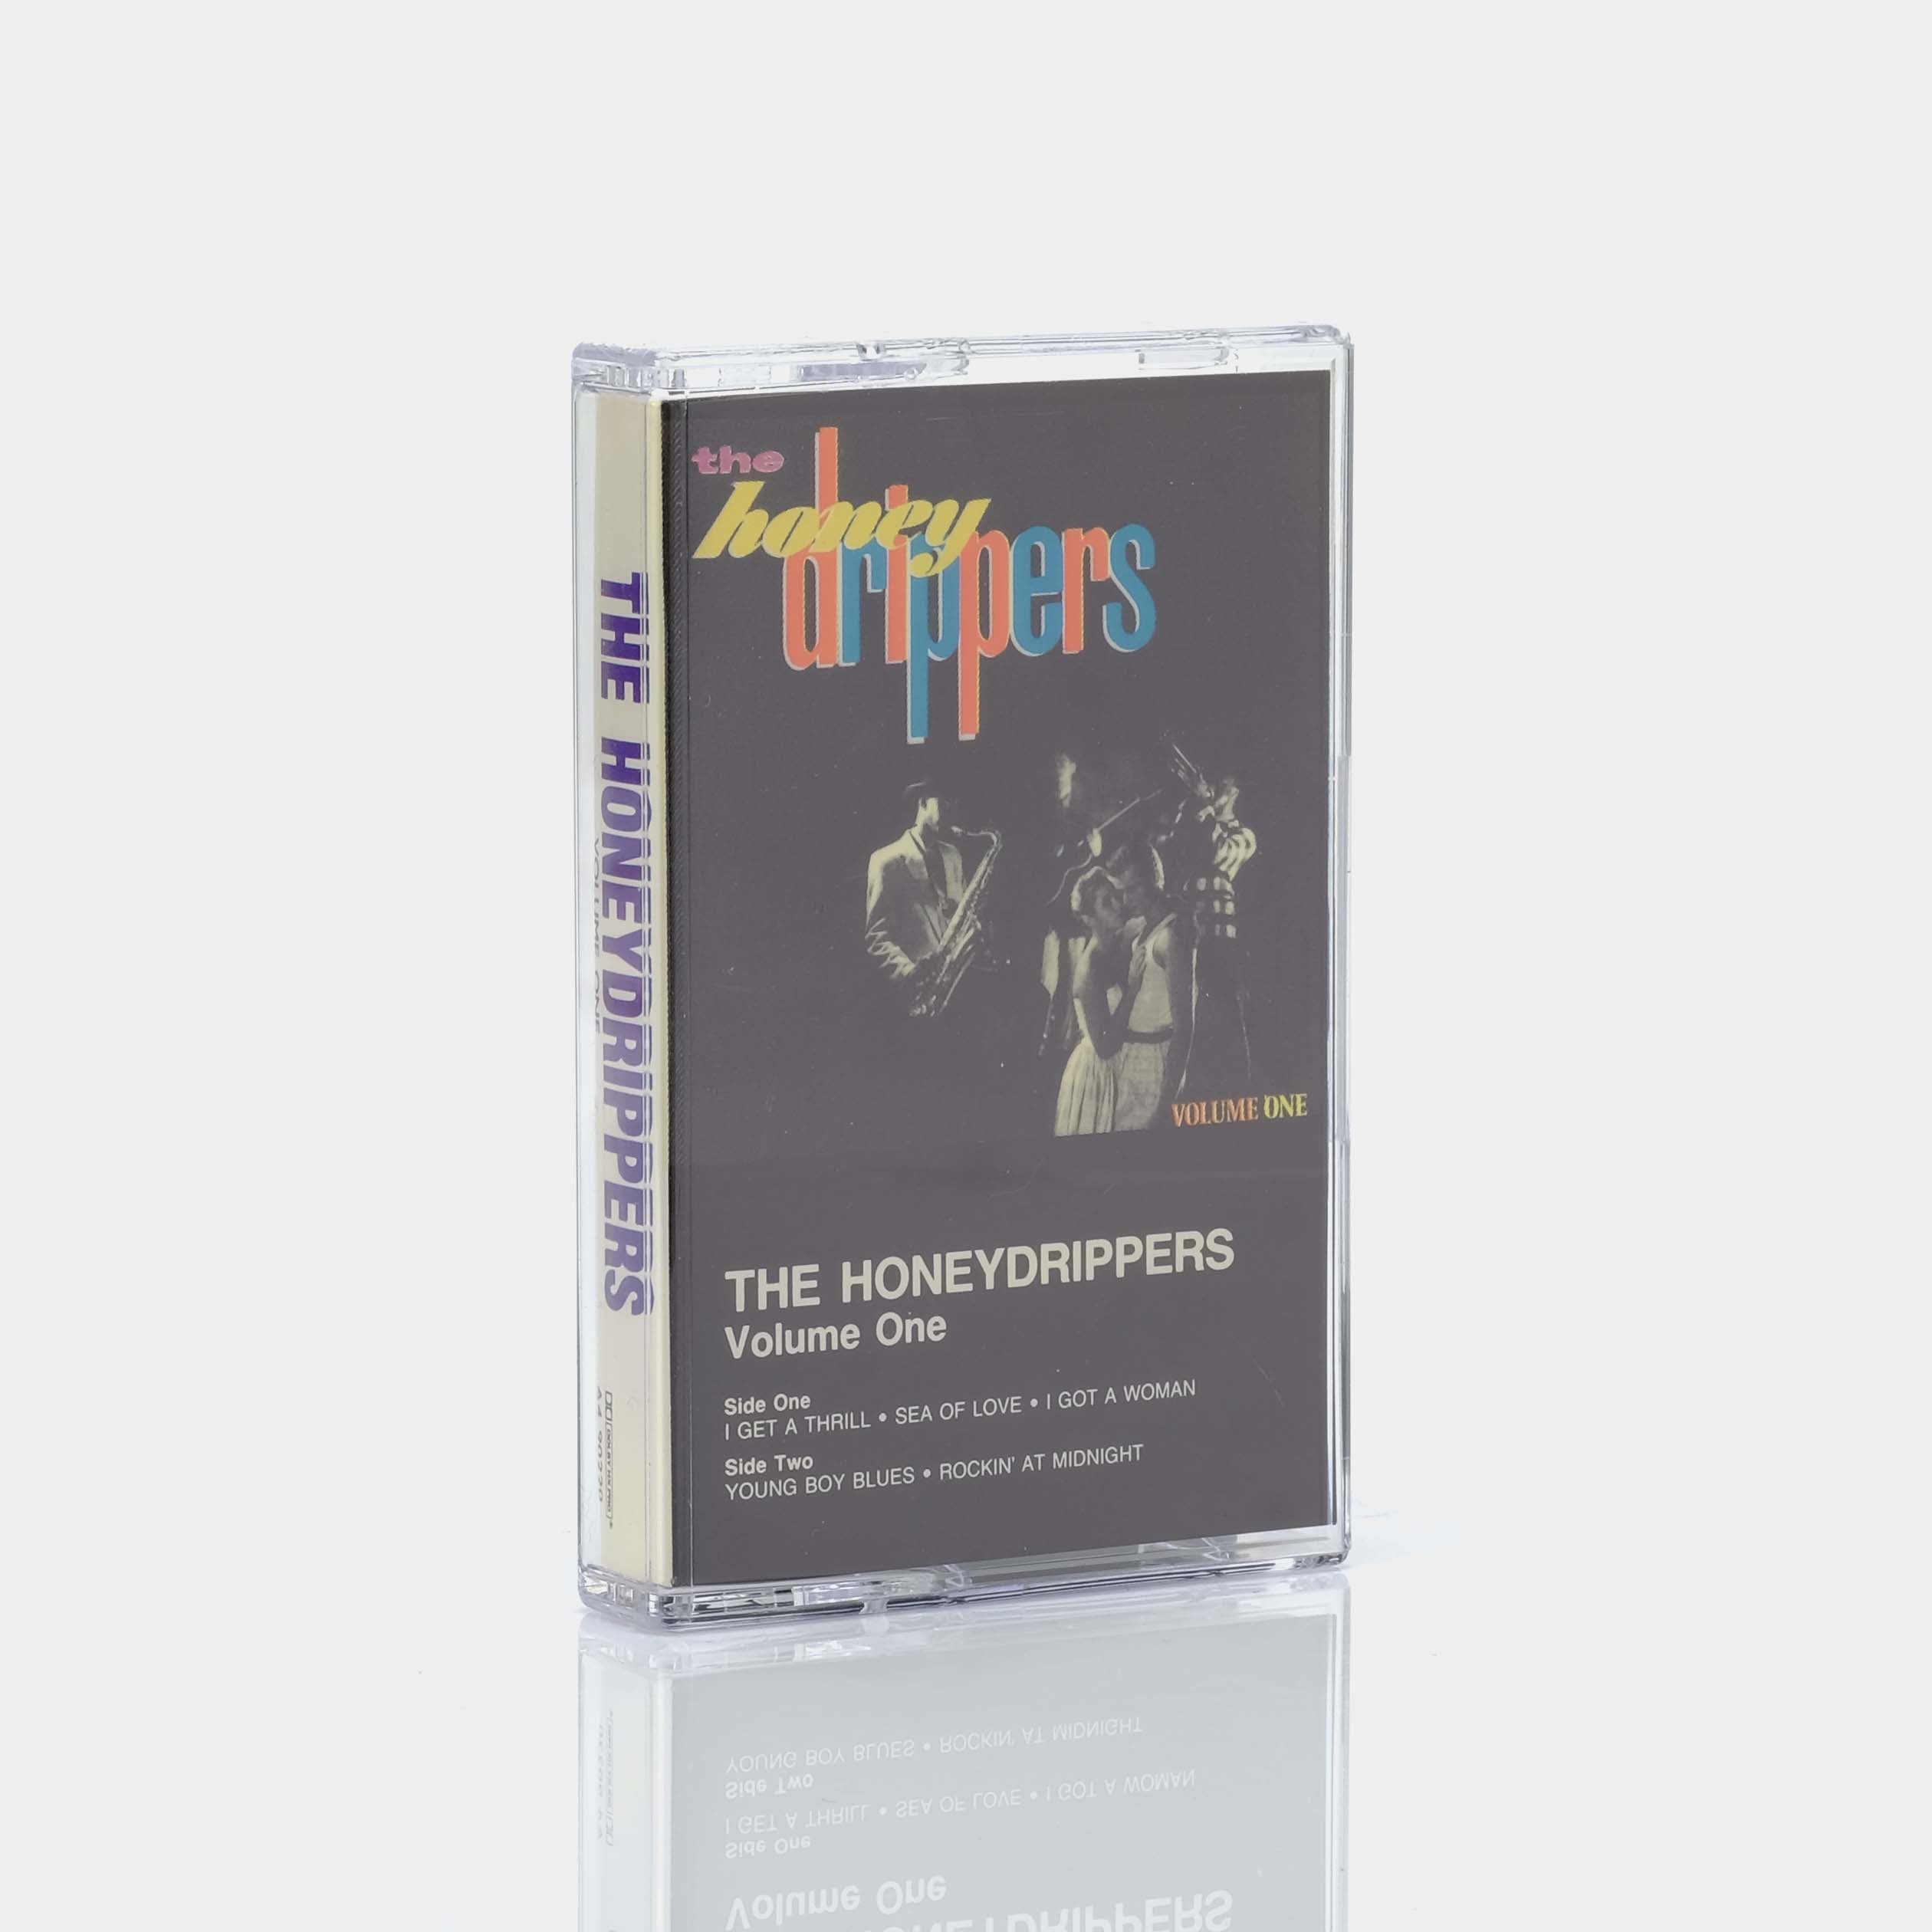 The Honeydrippers - Volume One Cassette Tape